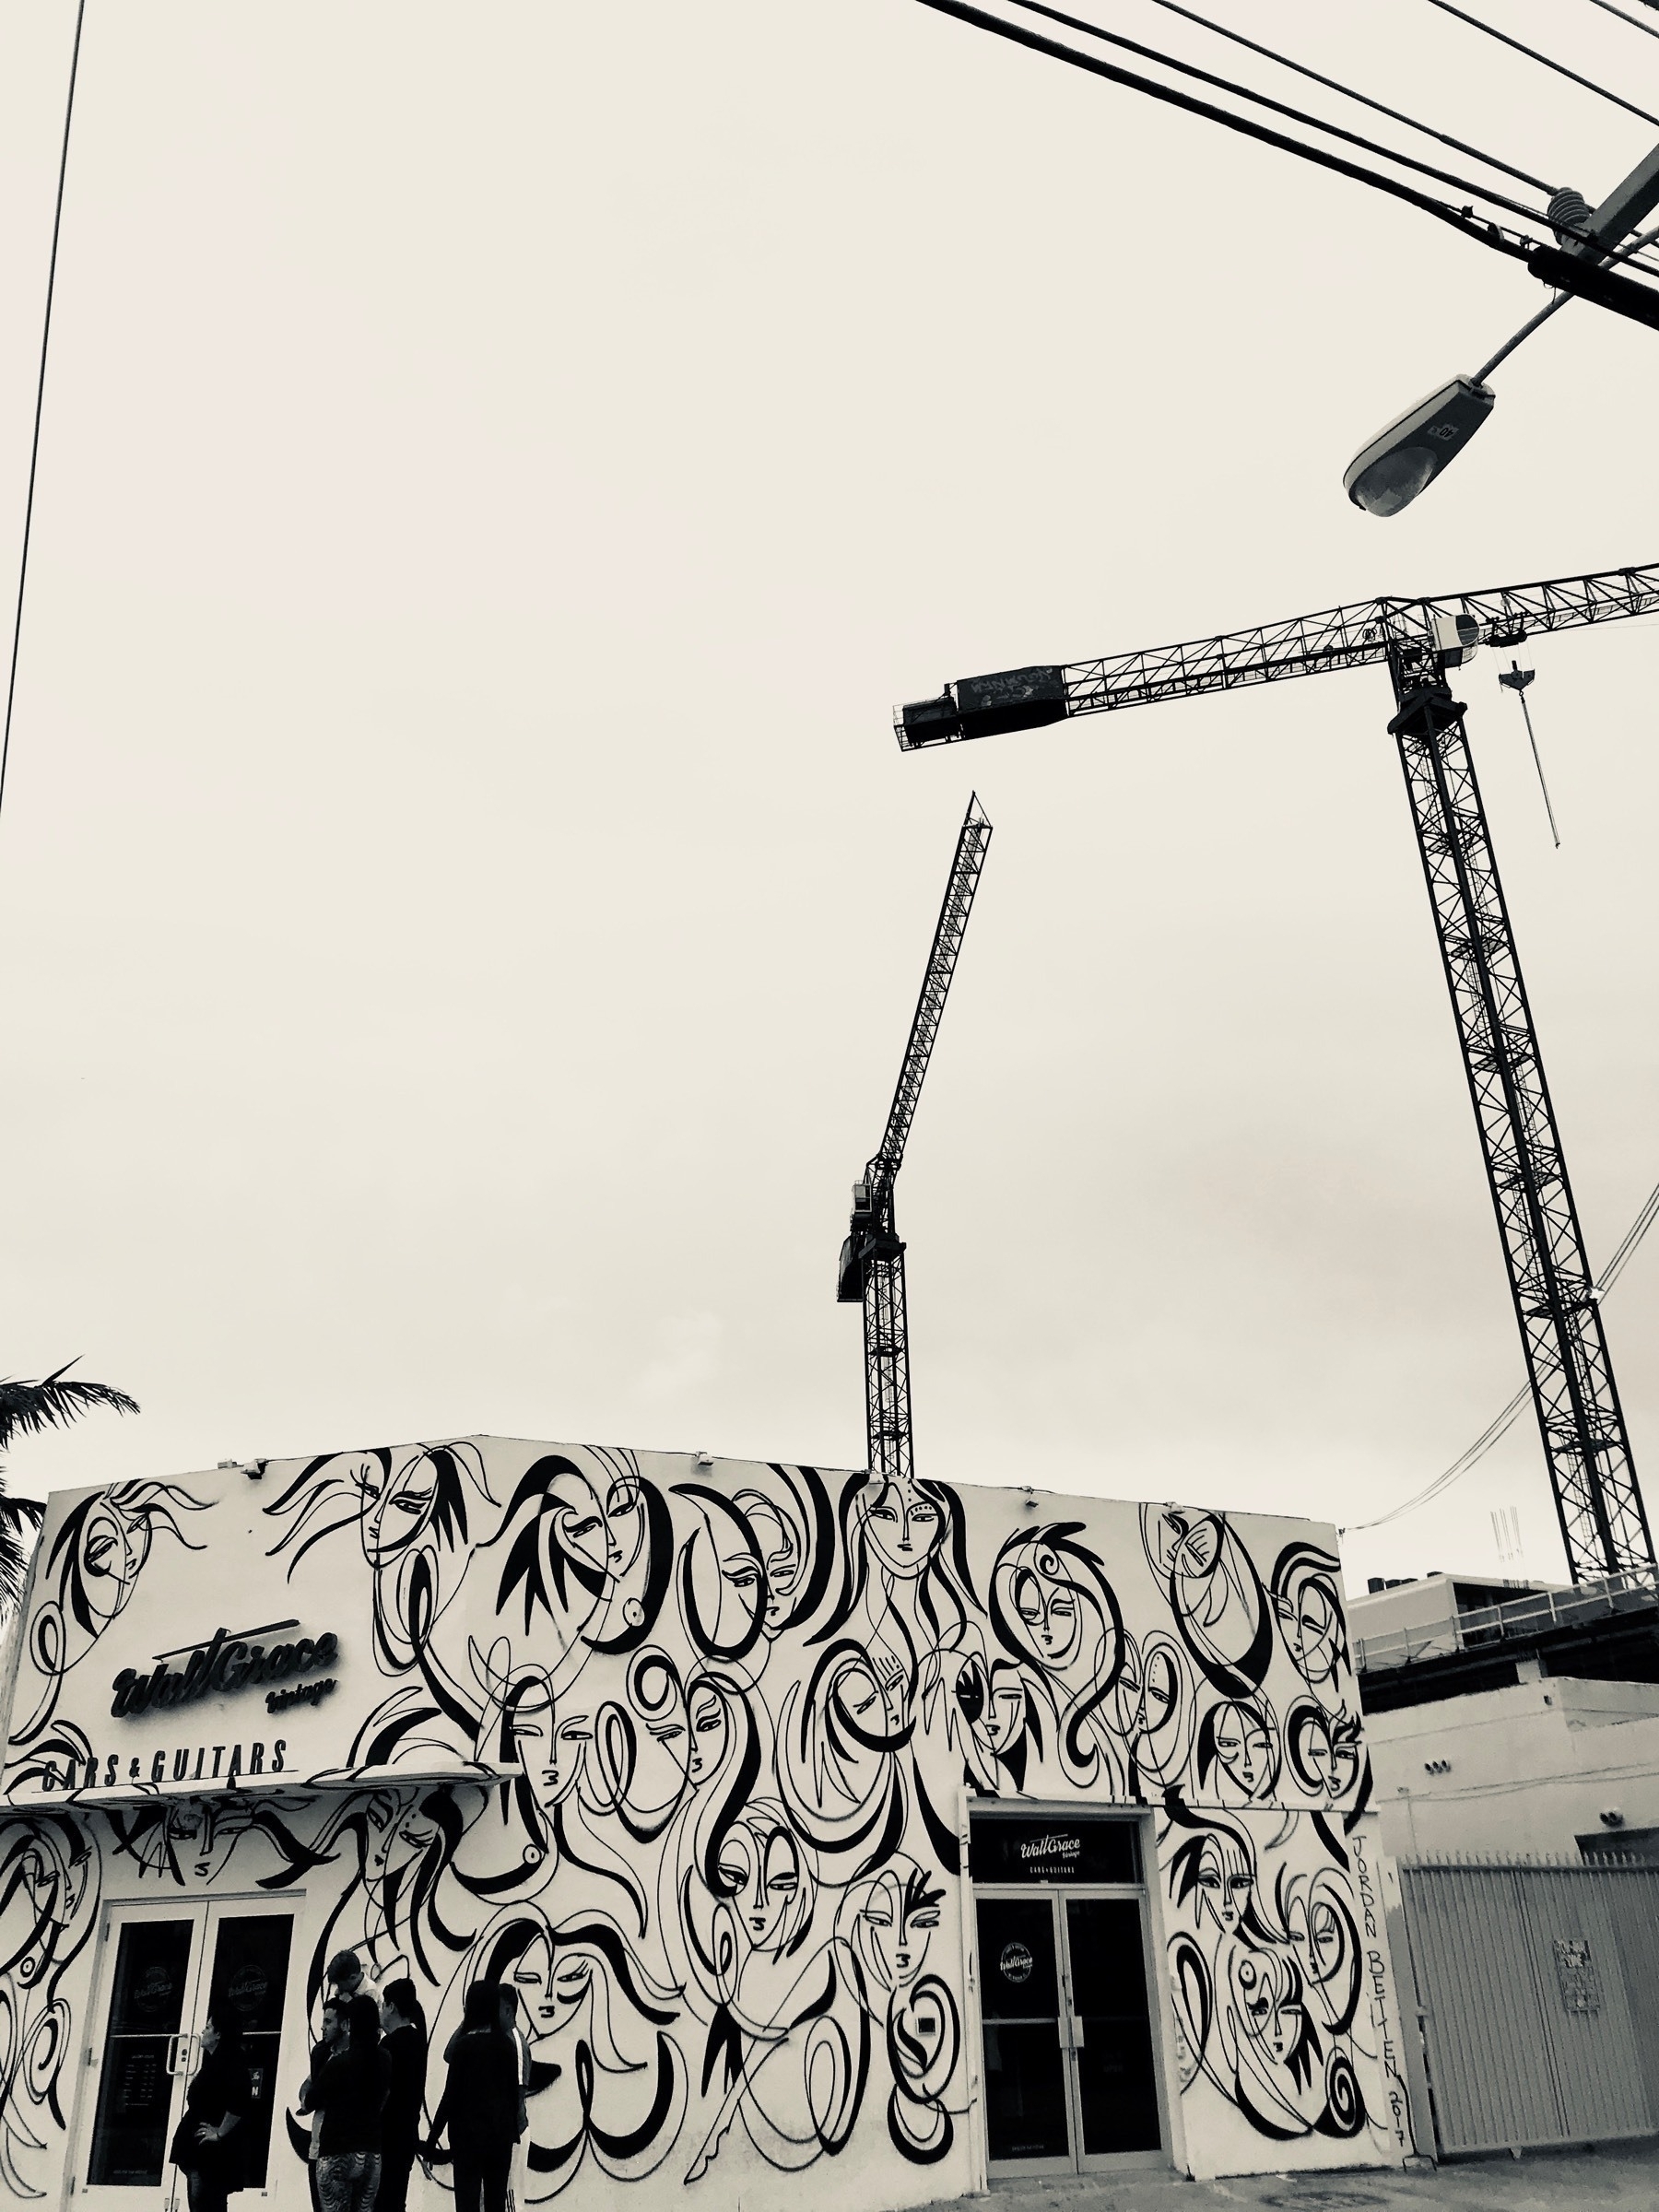 A black and white photograph of cranes appearing above a single story building with an abstract mural painted on it